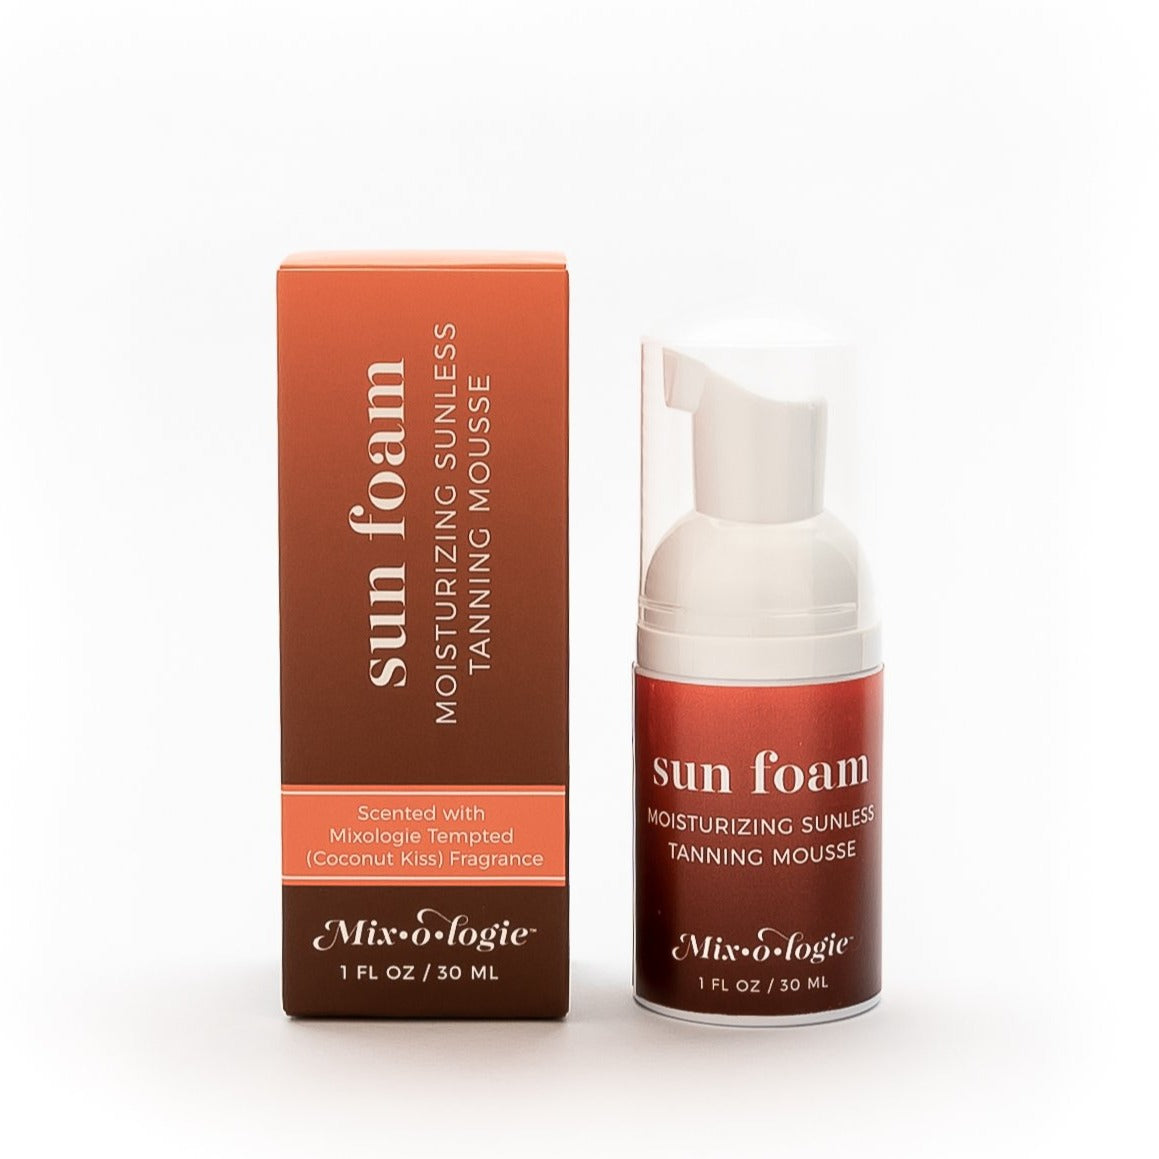 A box of Mixologie SunFoam Tanning Mousse with a box next to it.